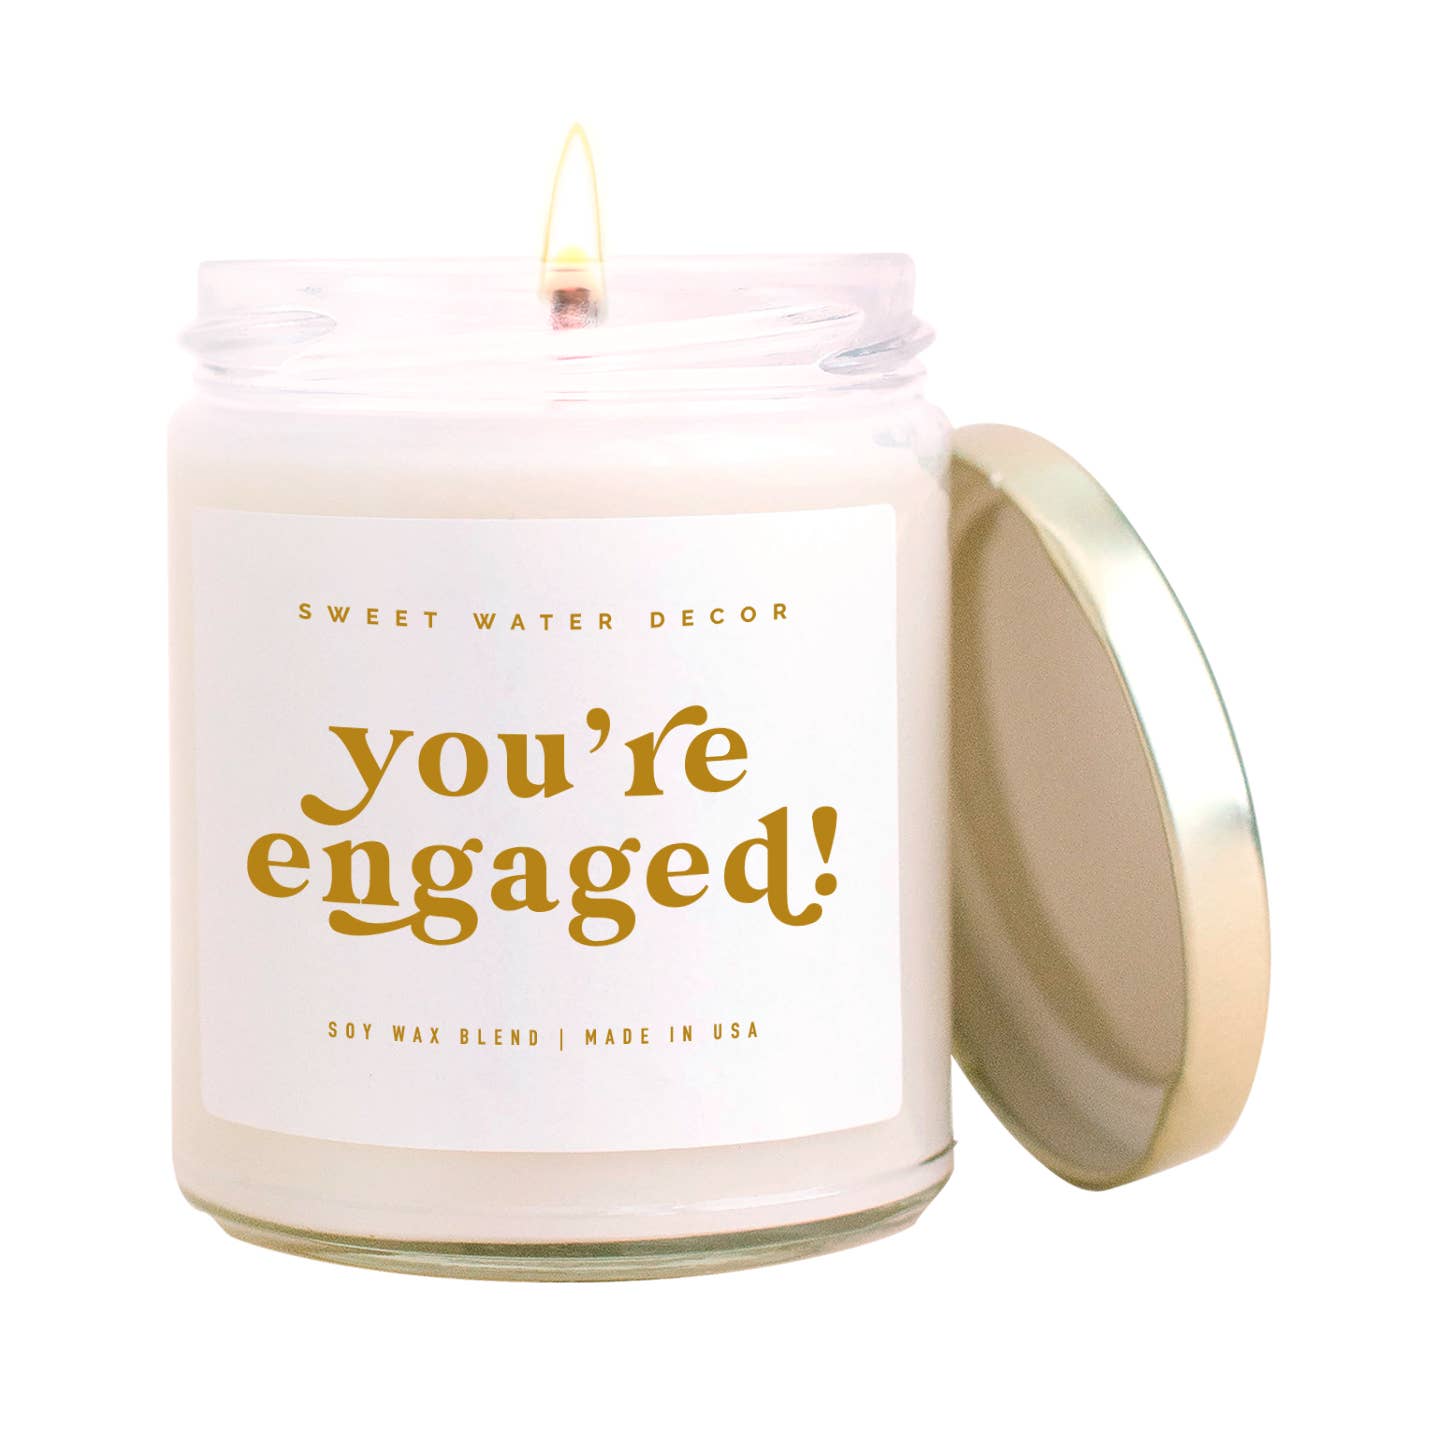 You're Engaged! Soy Candle - Clear Jar - 9 oz